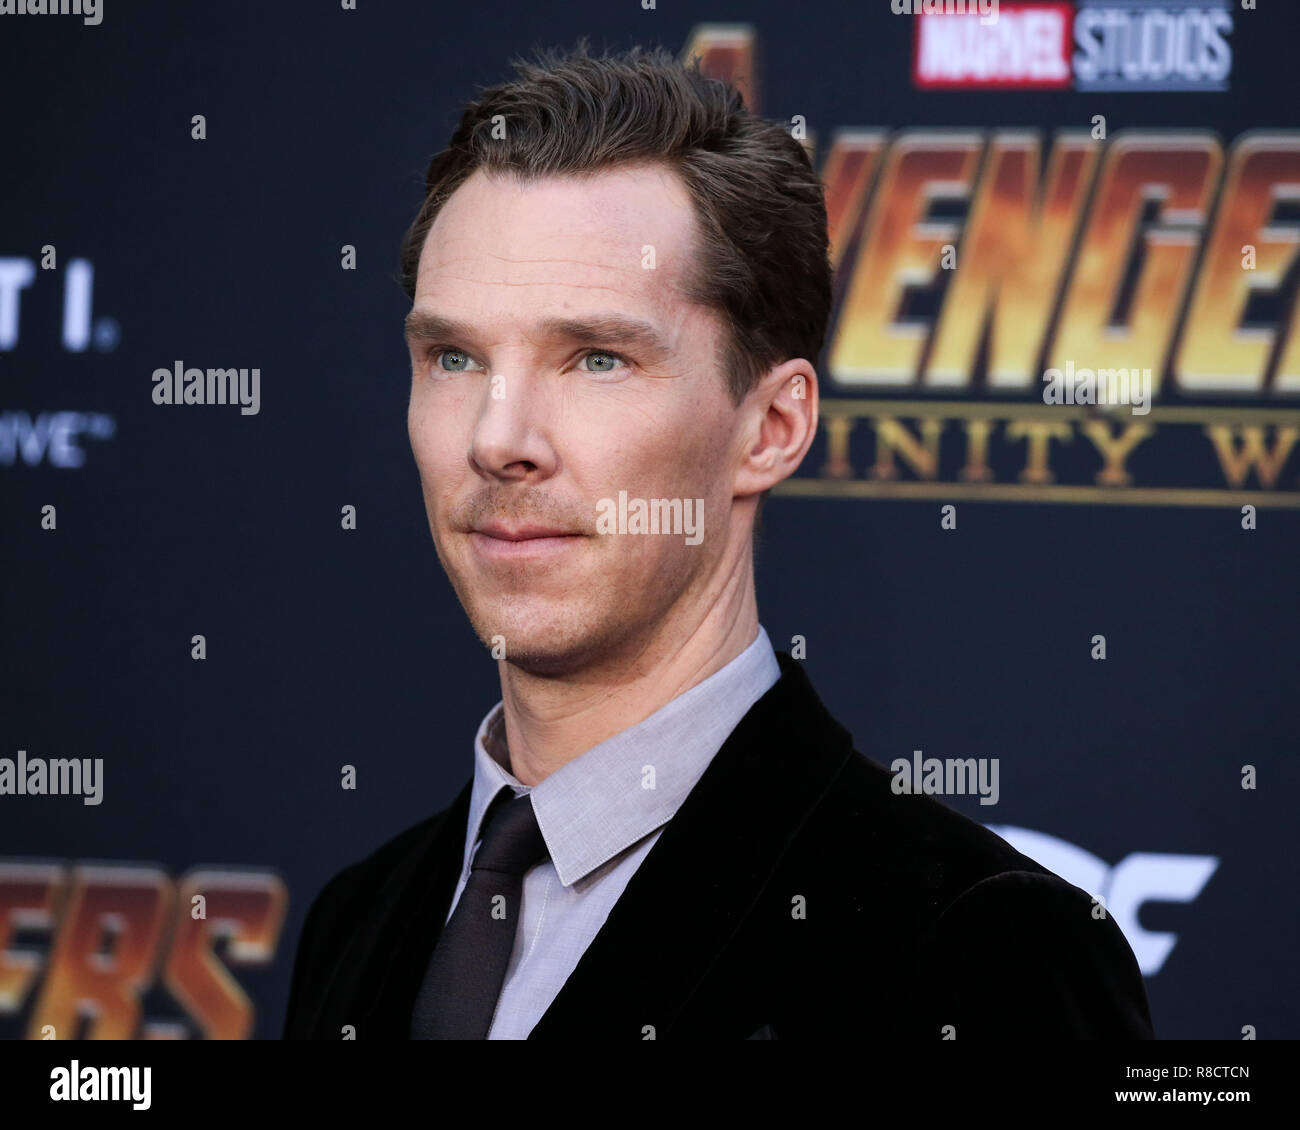 HOLLYWOOD, LOS ANGELES, CA, USA - APRIL 23: Benedict Cumberbatch at the World Premiere Of Disney And Marvel's 'Avengers: Infinity War' held at the El Capitan Theatre, Dolby Theatre and TCL Chinese Theatre IMAX on April 23, 2018 in Hollywood, Los Angeles, California, United States. (Photo by Xavier Collin/Image Press Agency) Stock Photo